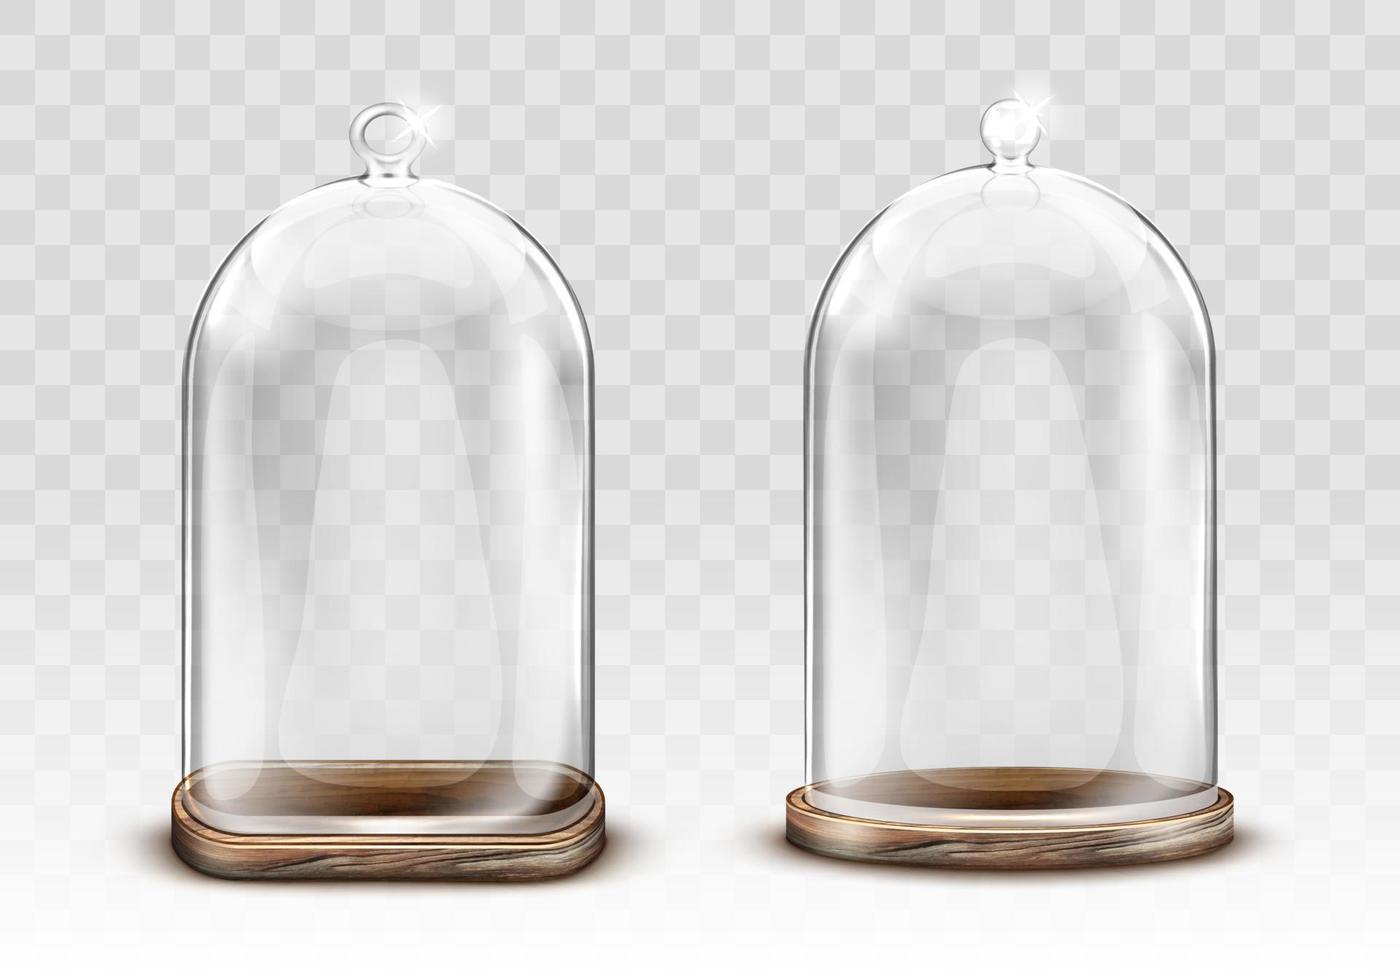 Vintage glass dome and wooden tray realistic vector